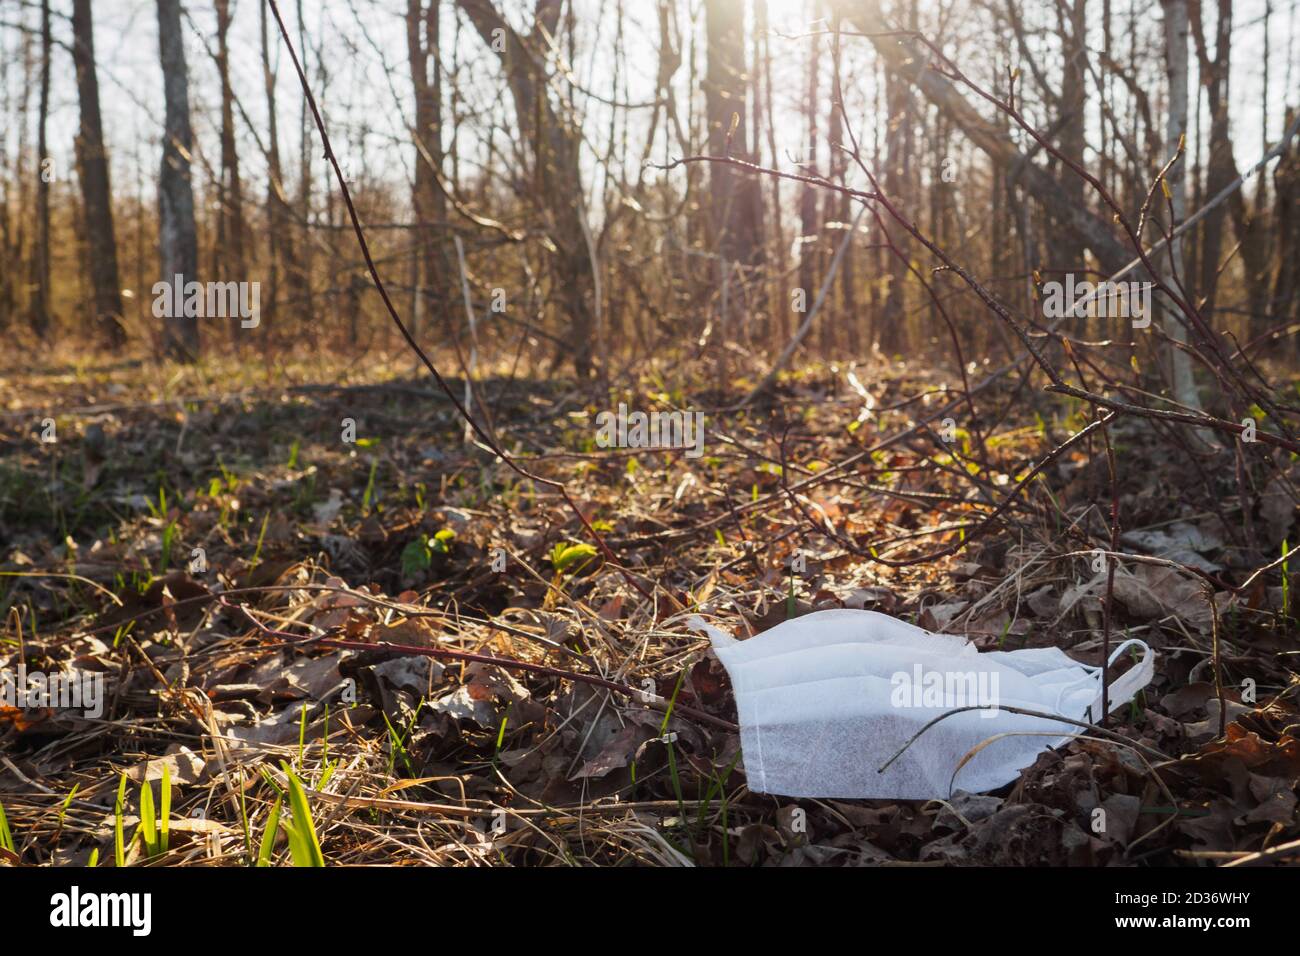 White disposable medical mask lies on old dry leaves, thrown away like garbage in spring forest. Selective focus Stock Photo